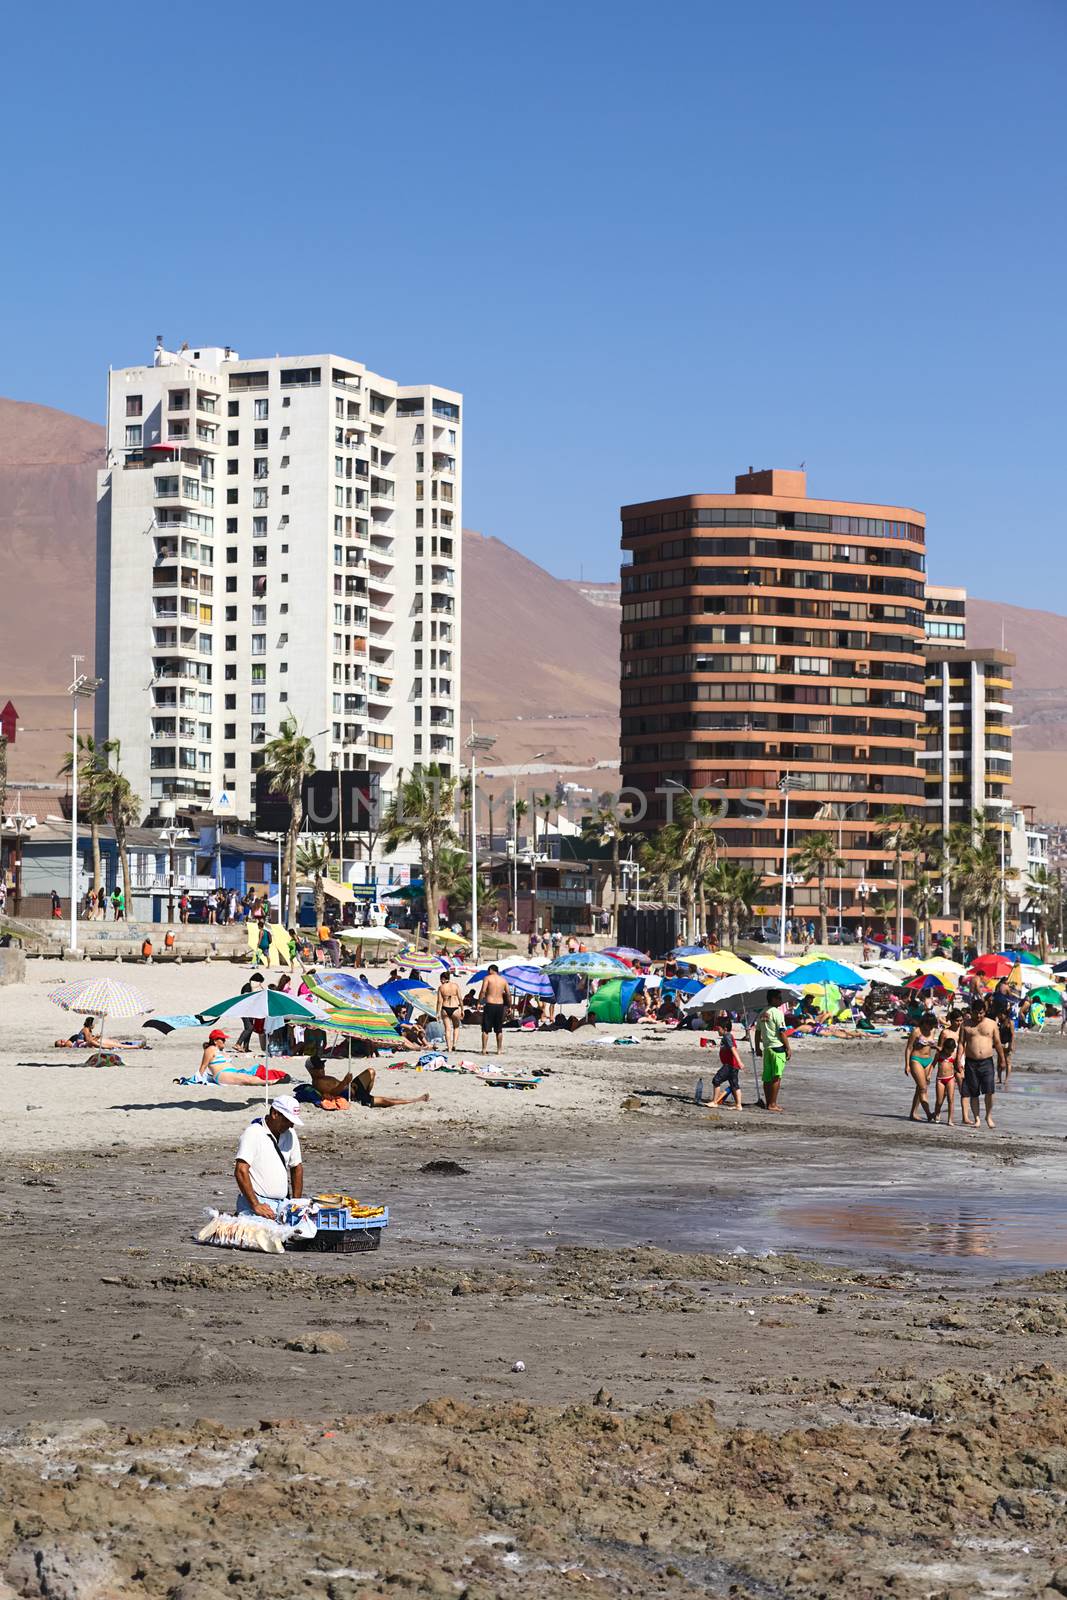 Cavancha Beach in Iquique, Chile by sven